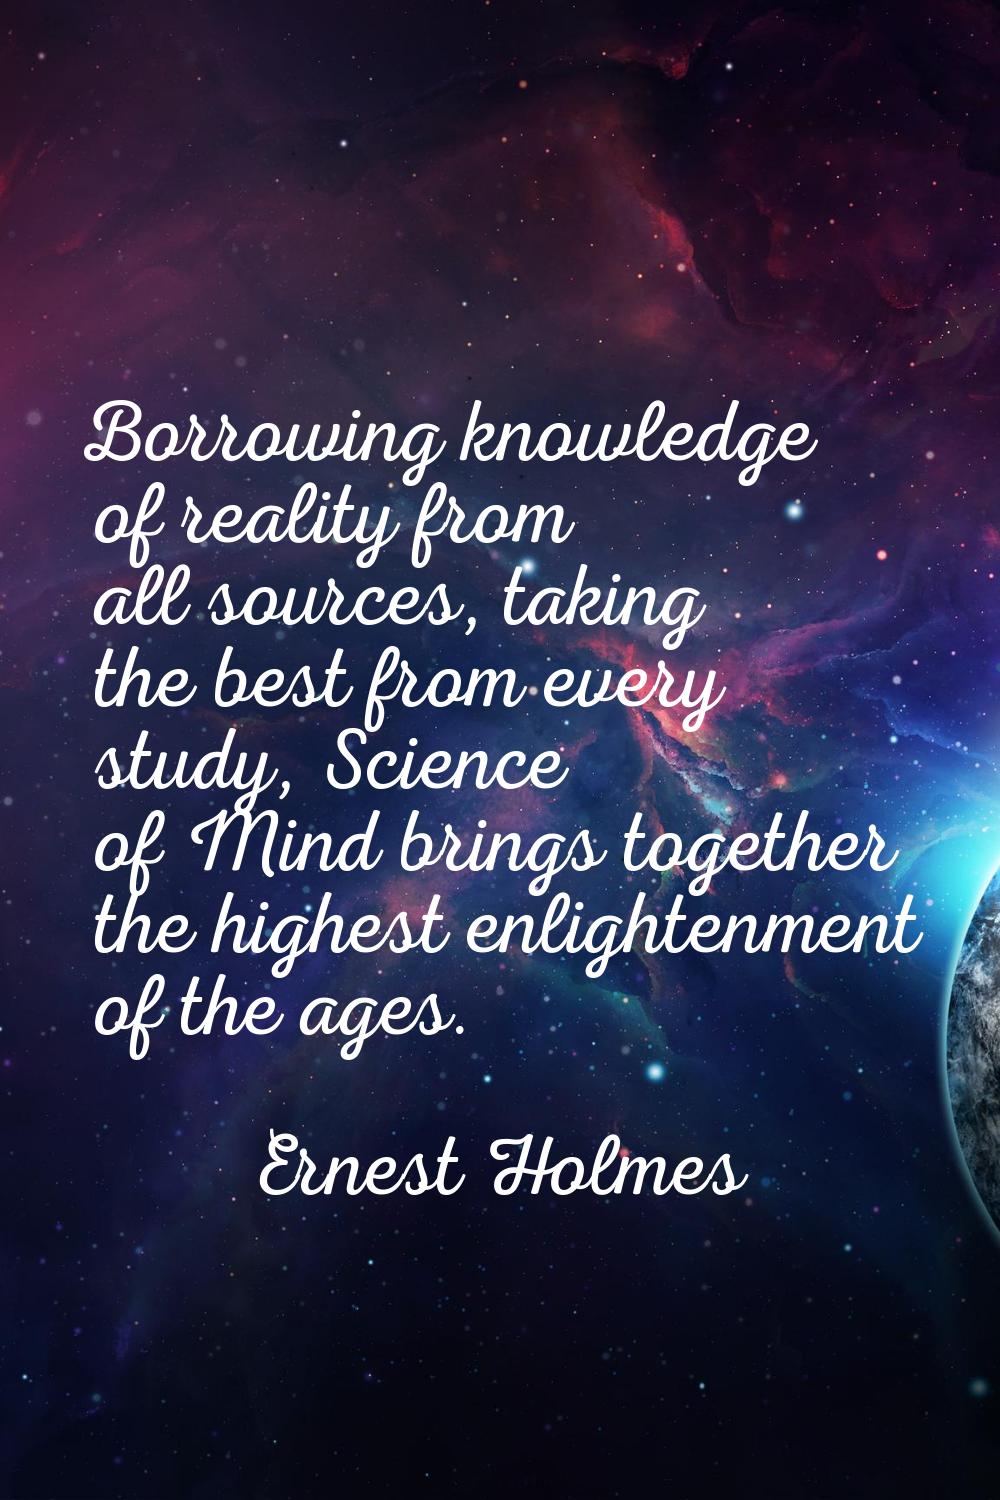 Borrowing knowledge of reality from all sources, taking the best from every study, Science of Mind 